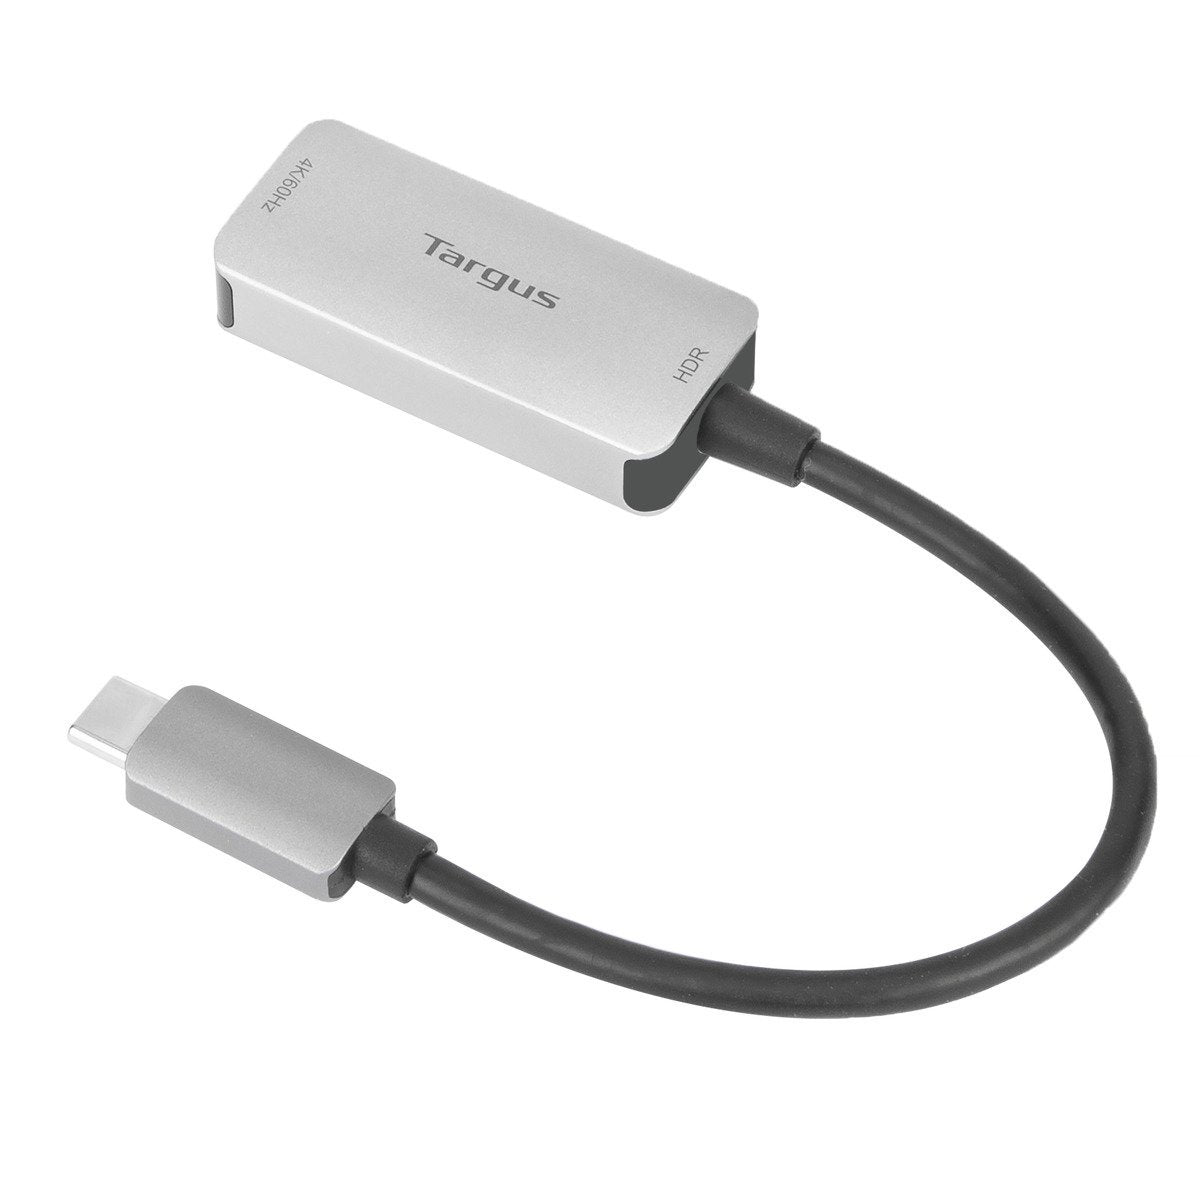 weme thunderbolt to hdmi adapter update